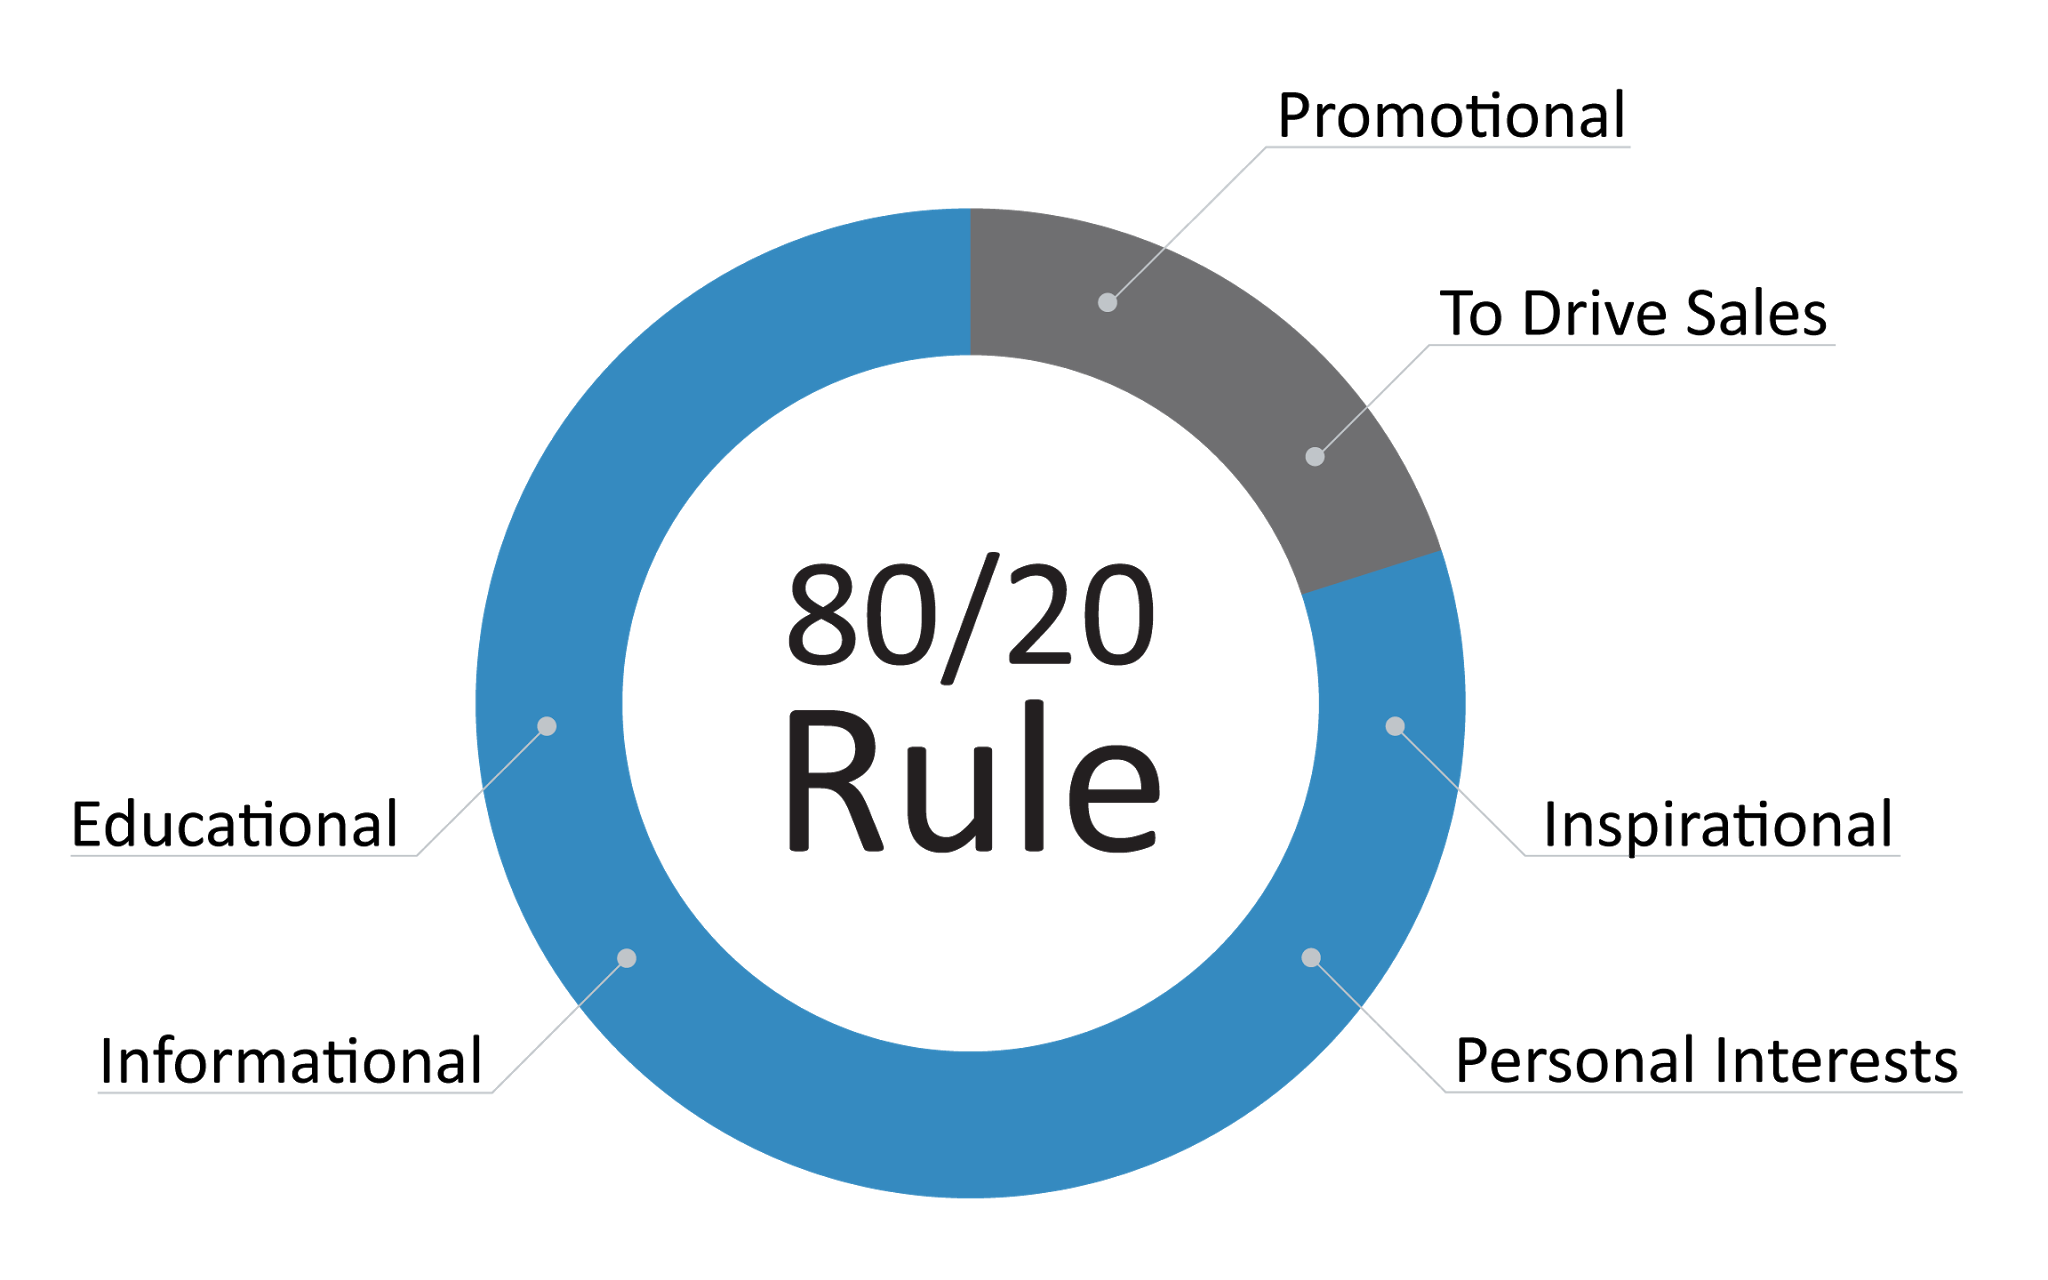 What is the 80 20 rule content?